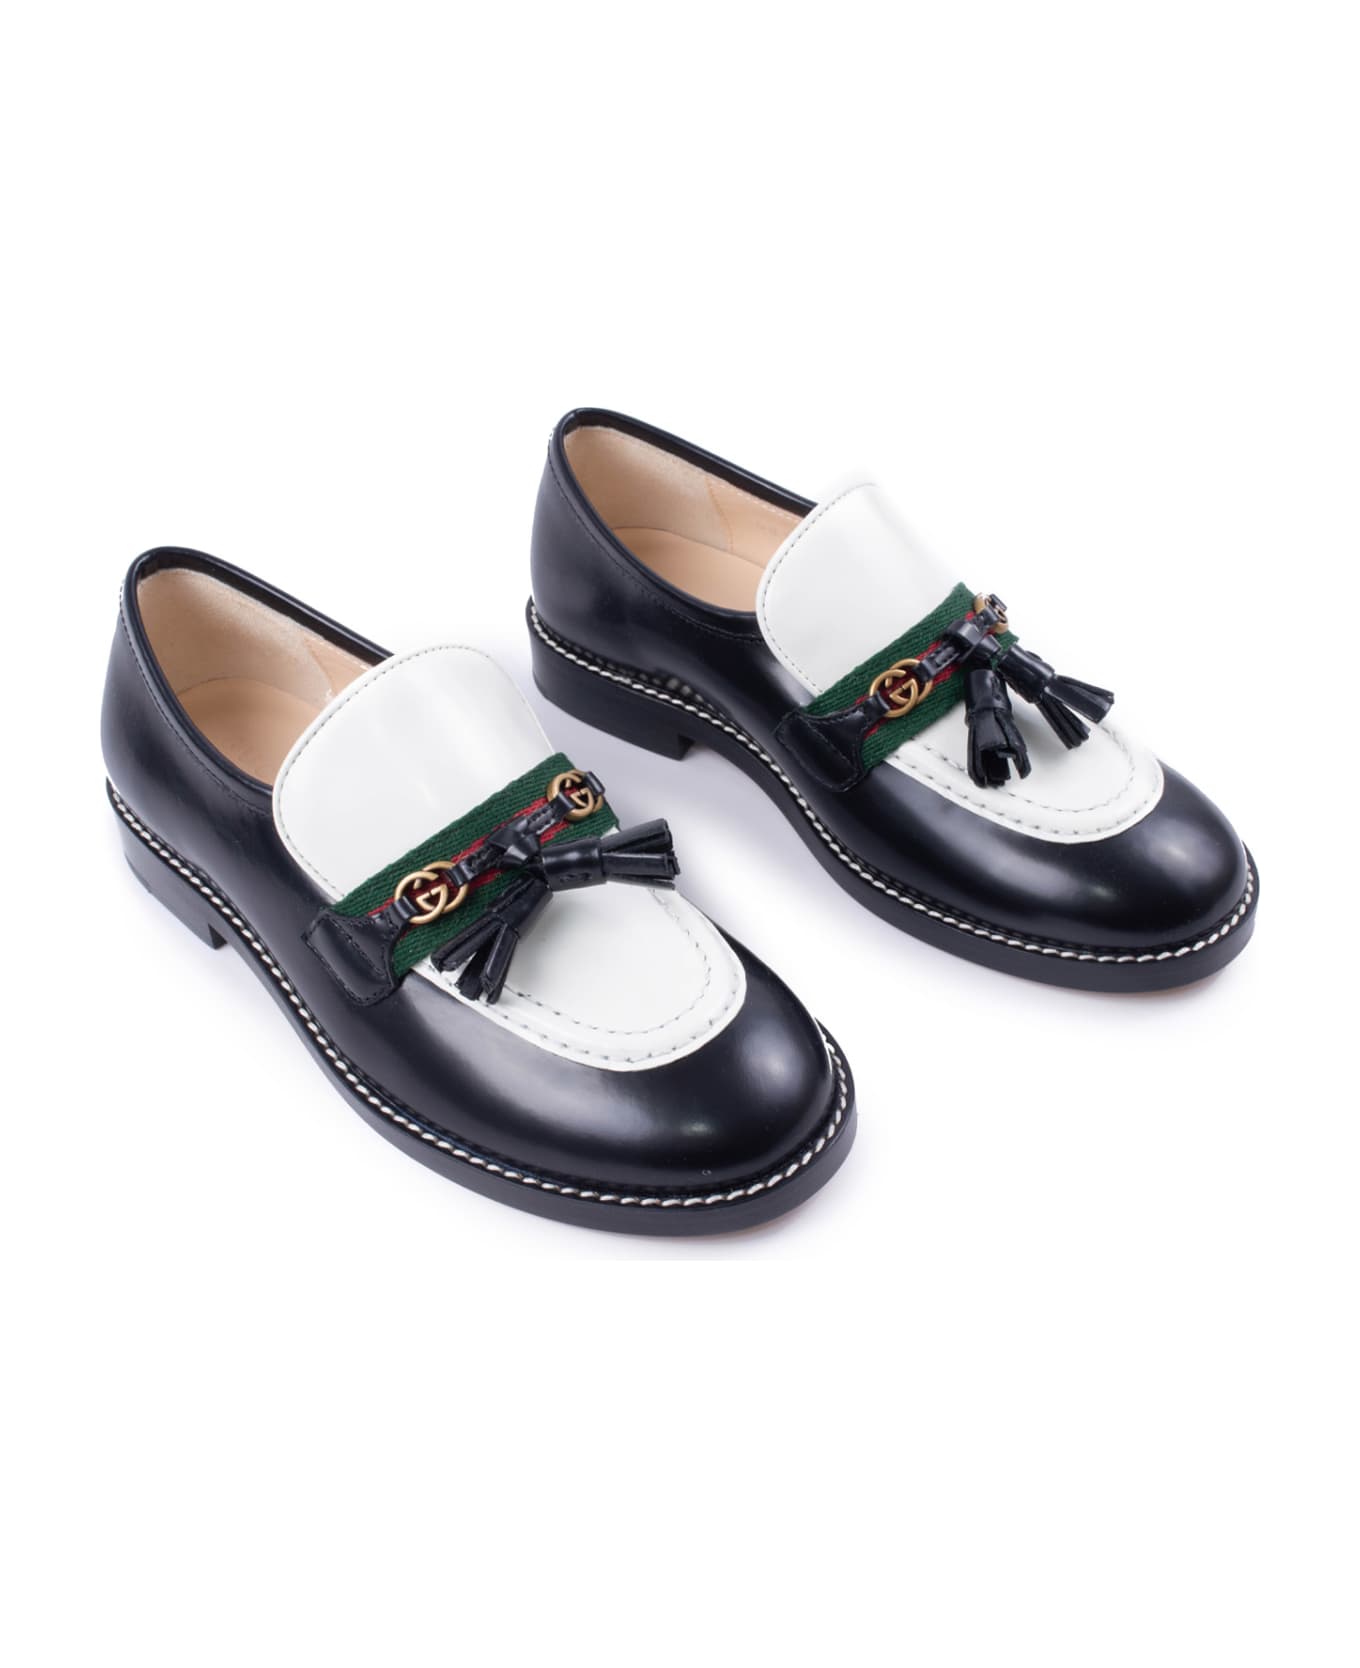 Gucci Moccasin With Web Tape - Back シューズ